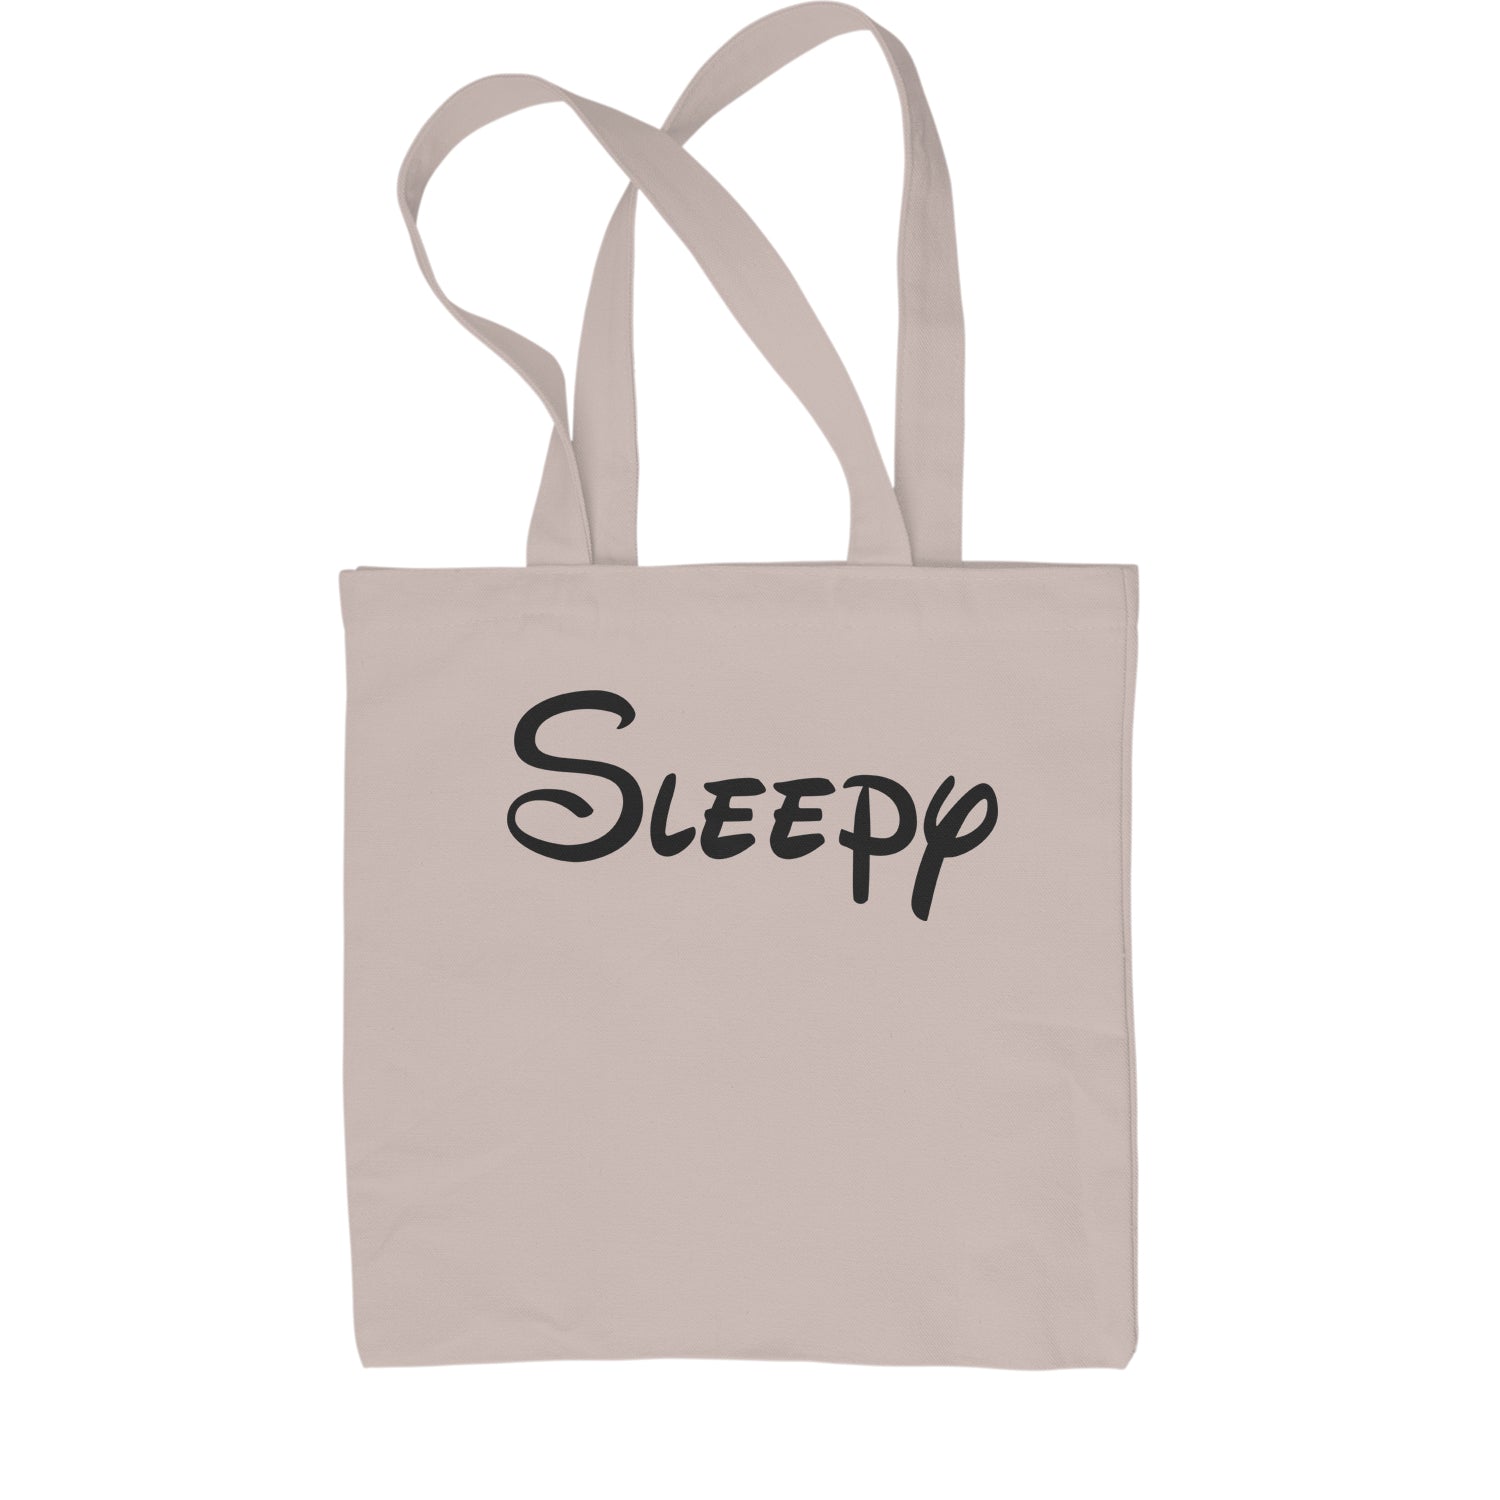 Sleepy - 7 Dwarfs Costume Shopping Tote Bag and, costume, dwarfs, group, halloween, matching, seven, snow, the, white by Expression Tees